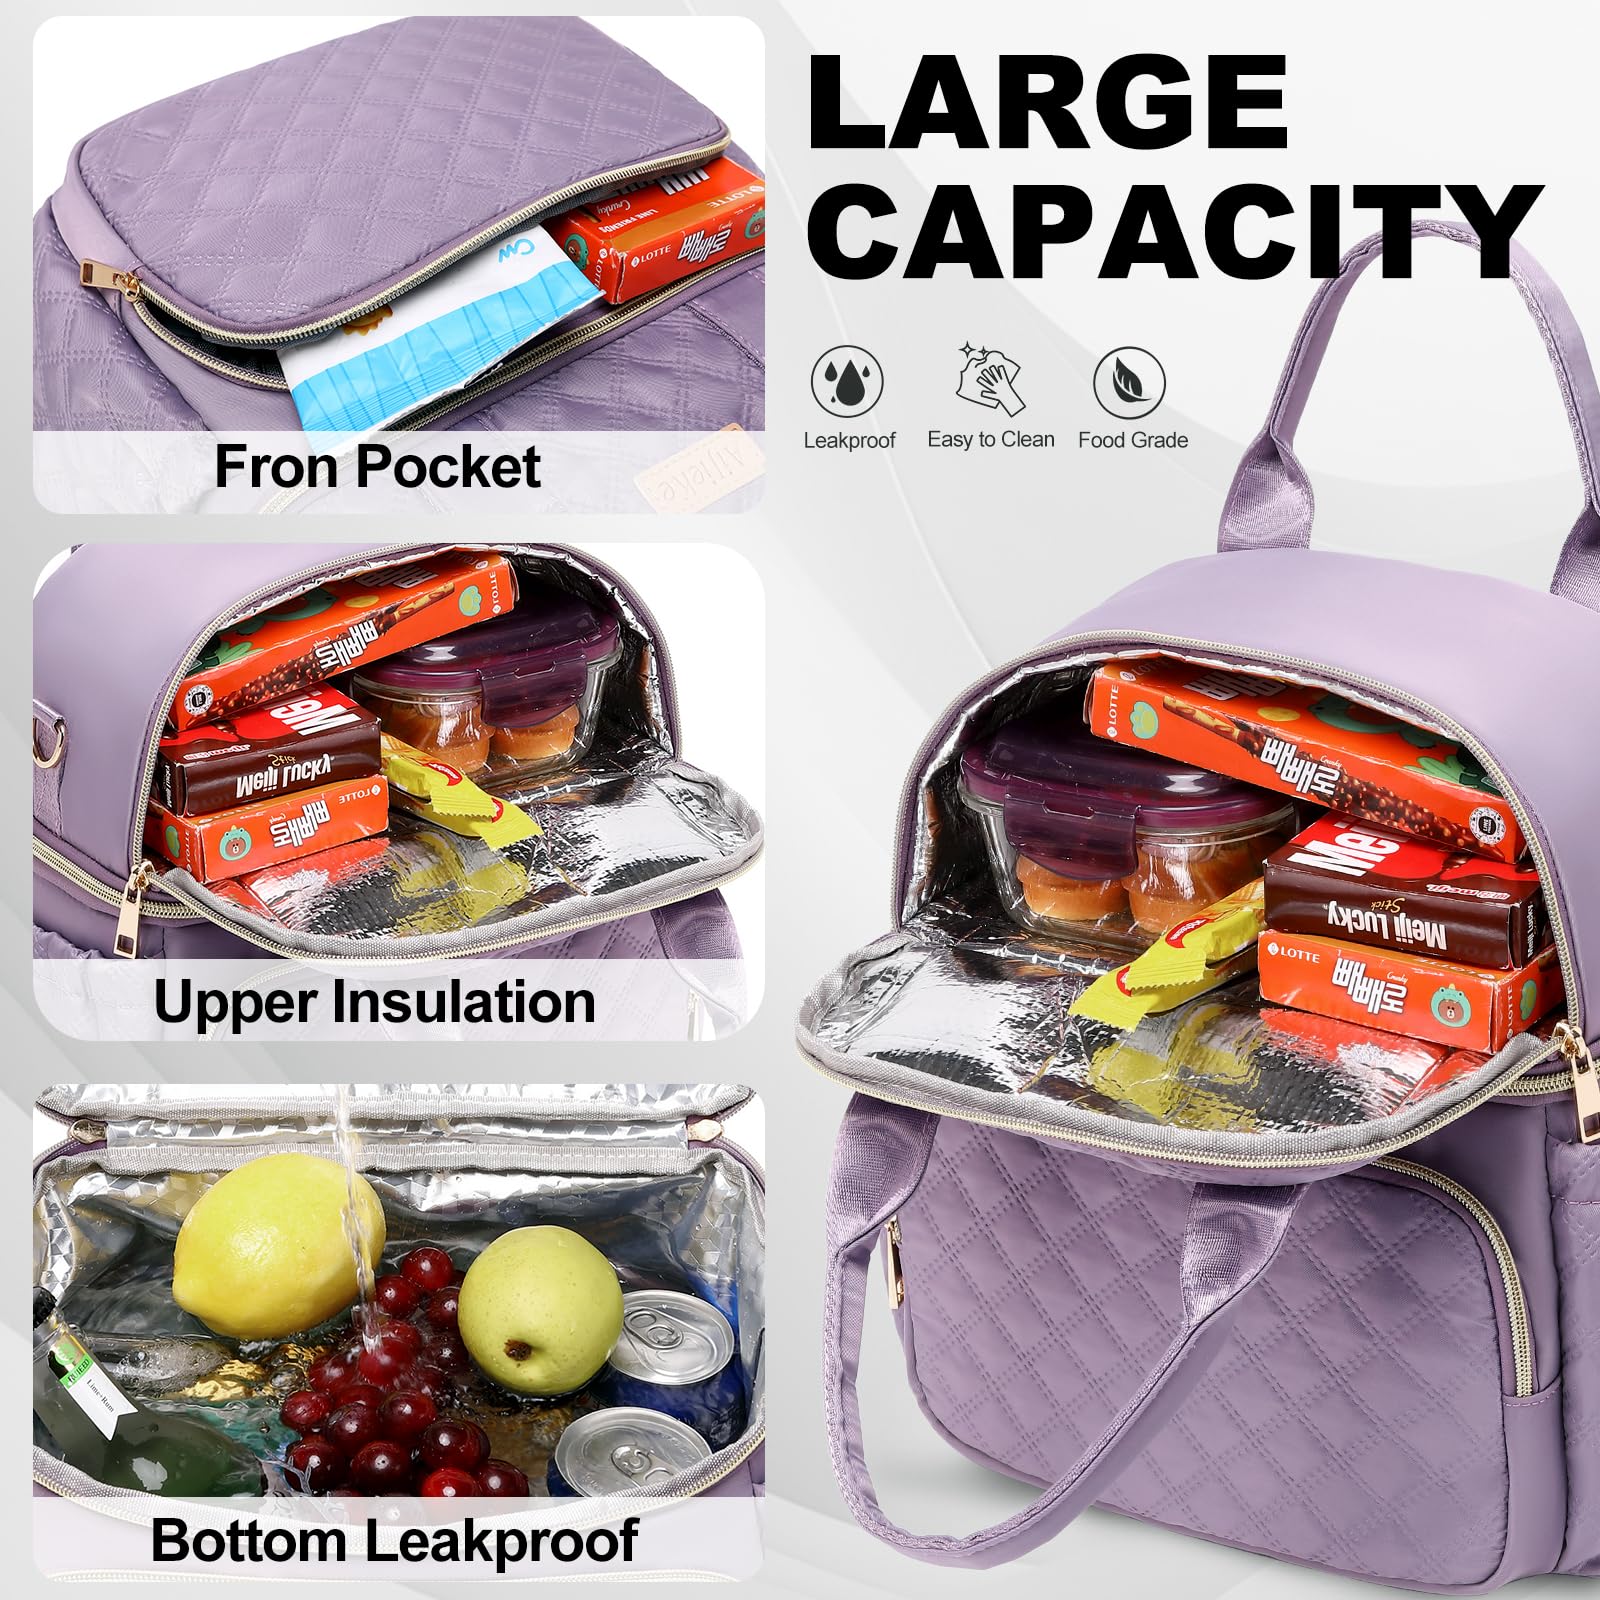 AIJIEKE Lunch Bag for Women, Work Lunch Box Insulated Lunch Bag, Double Deck Lunch Bag, Large Leakproof Lunch Tote Cooler Bag with Side Pockets & Adjustable Strap for Picnic, Light Purple